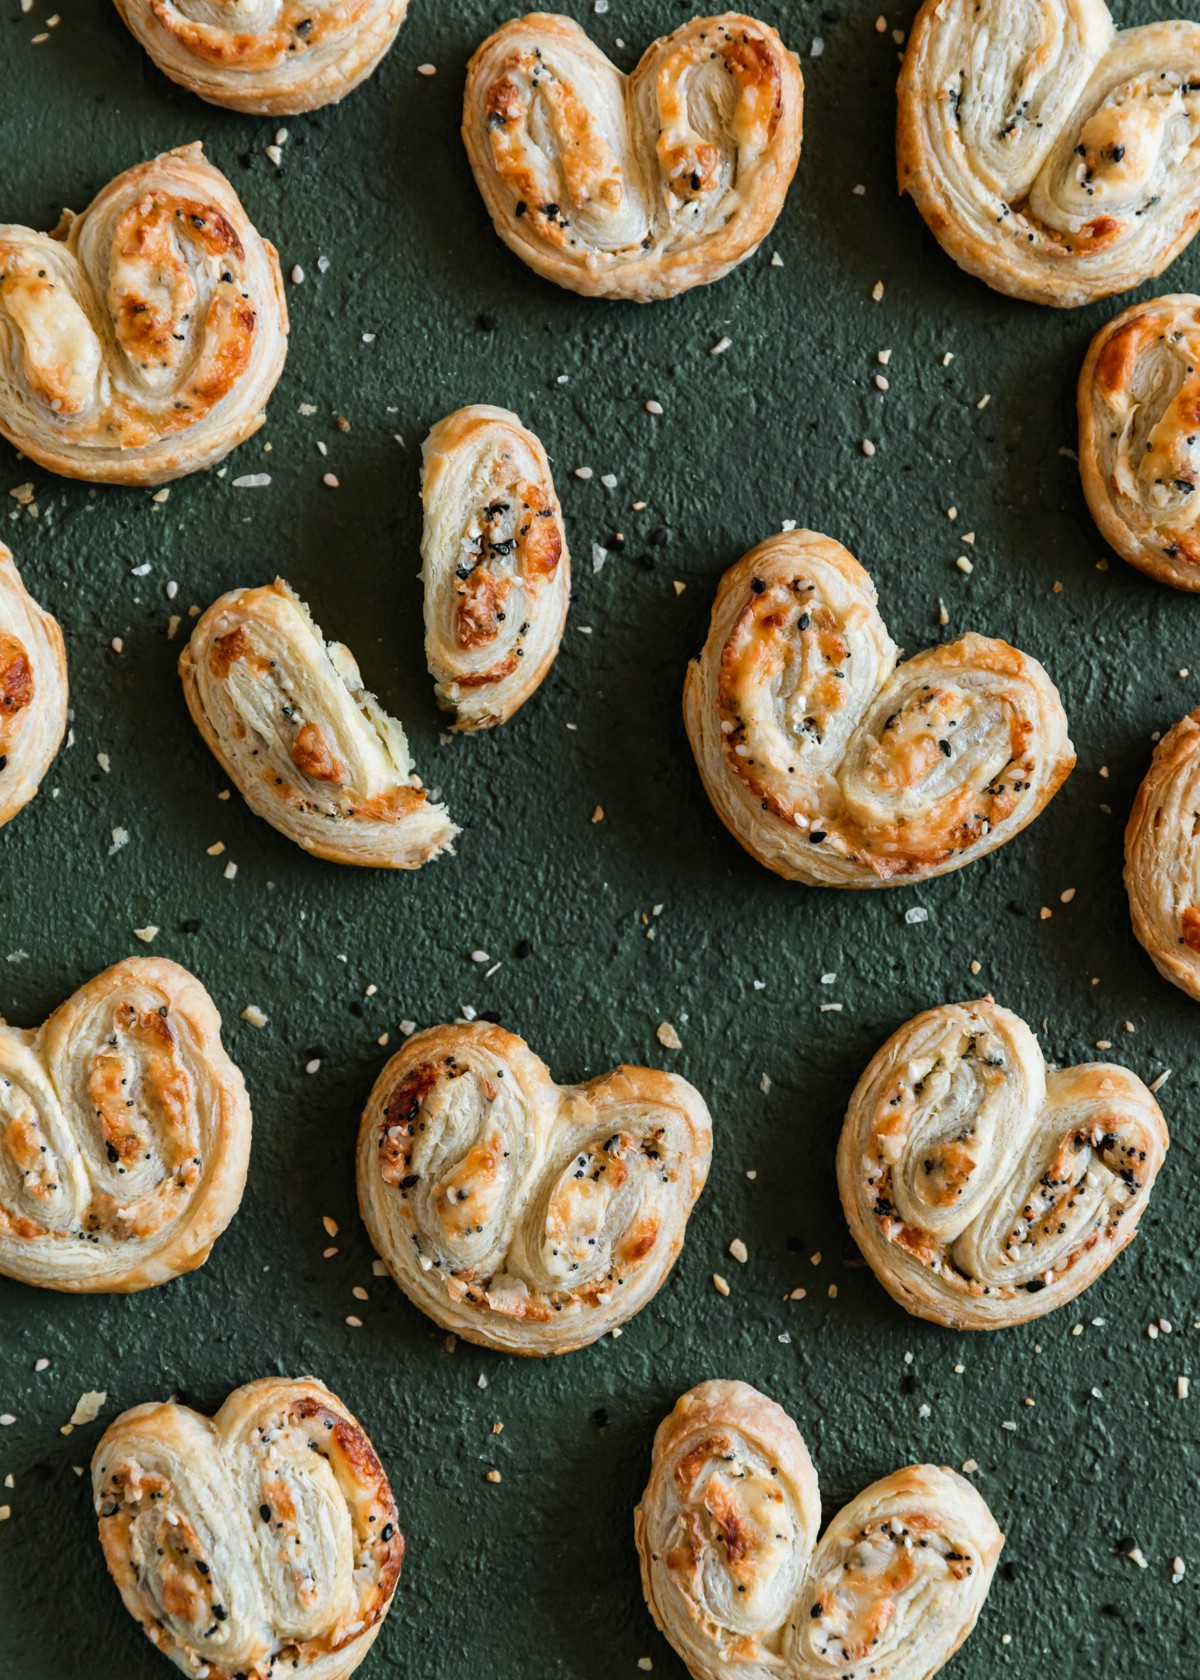 A close up overhead image of savory palmiers with cream cheese, Parmesan, and everything bagel spice on a dark green table. In the left upper corner, one of the palmiers is broken.